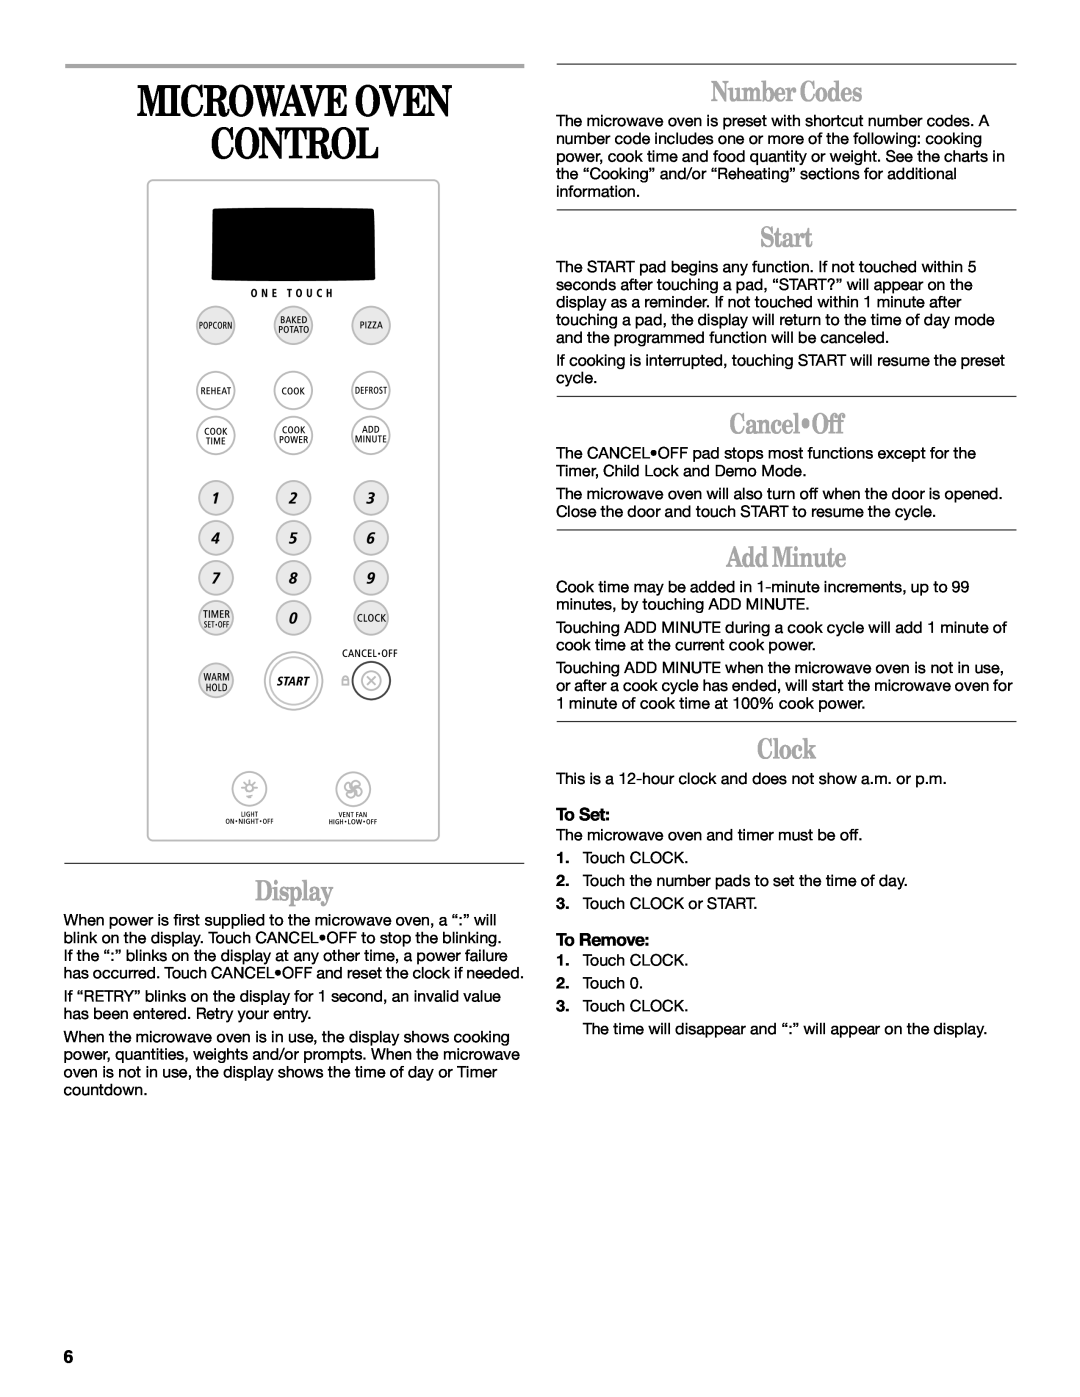 Whirlpool MH1141XM Microwave Oven Control, Display, Number Codes, Start, CancelOff, Add Minute, Clock, To Set, To Remove 